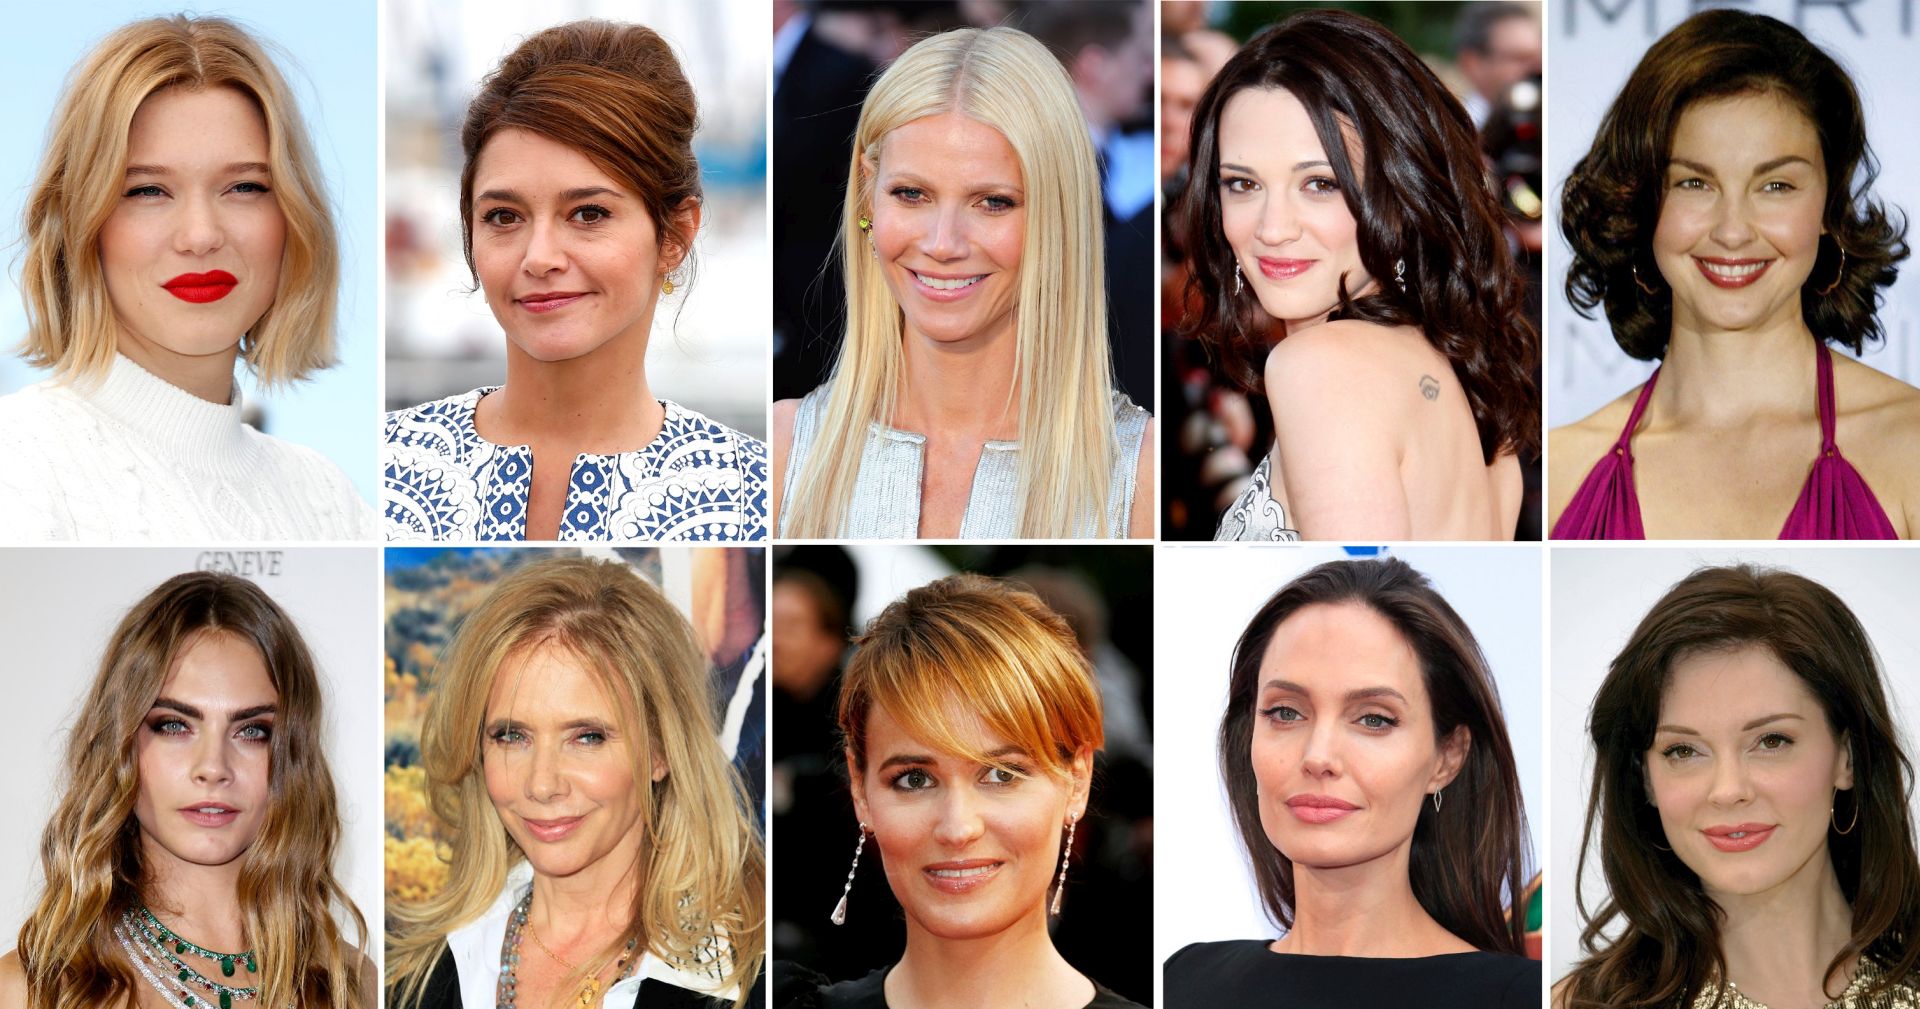 epa06260297 (FILE) - A combo file picture shows (top L-R), French actress Lea Seydoux, French actress Emma de Caunes, US actress Gwyneth Paltrow, Itailan actress Asia Argento, US actress Ashley Judd (bottom L-R) British model Cara Delevingne, US actress Rosanna Arquette, French actress Judith Godreche and US actress Angelina Jolie, US actress Rose McGowan. These actresses have made accusations in media against US film producer Harvey Weinstein of assault. According to media reports on 09 October 2017, Harvey Weinstein was fired from The Weinstein Company after additional information surfaced concerning his conduct amid accusations of decades of sexual harassment.  EPA/N. PROMMER / G. HORCAJUELO / S. NOGIER / A. GOMBERT / PETER FOLE